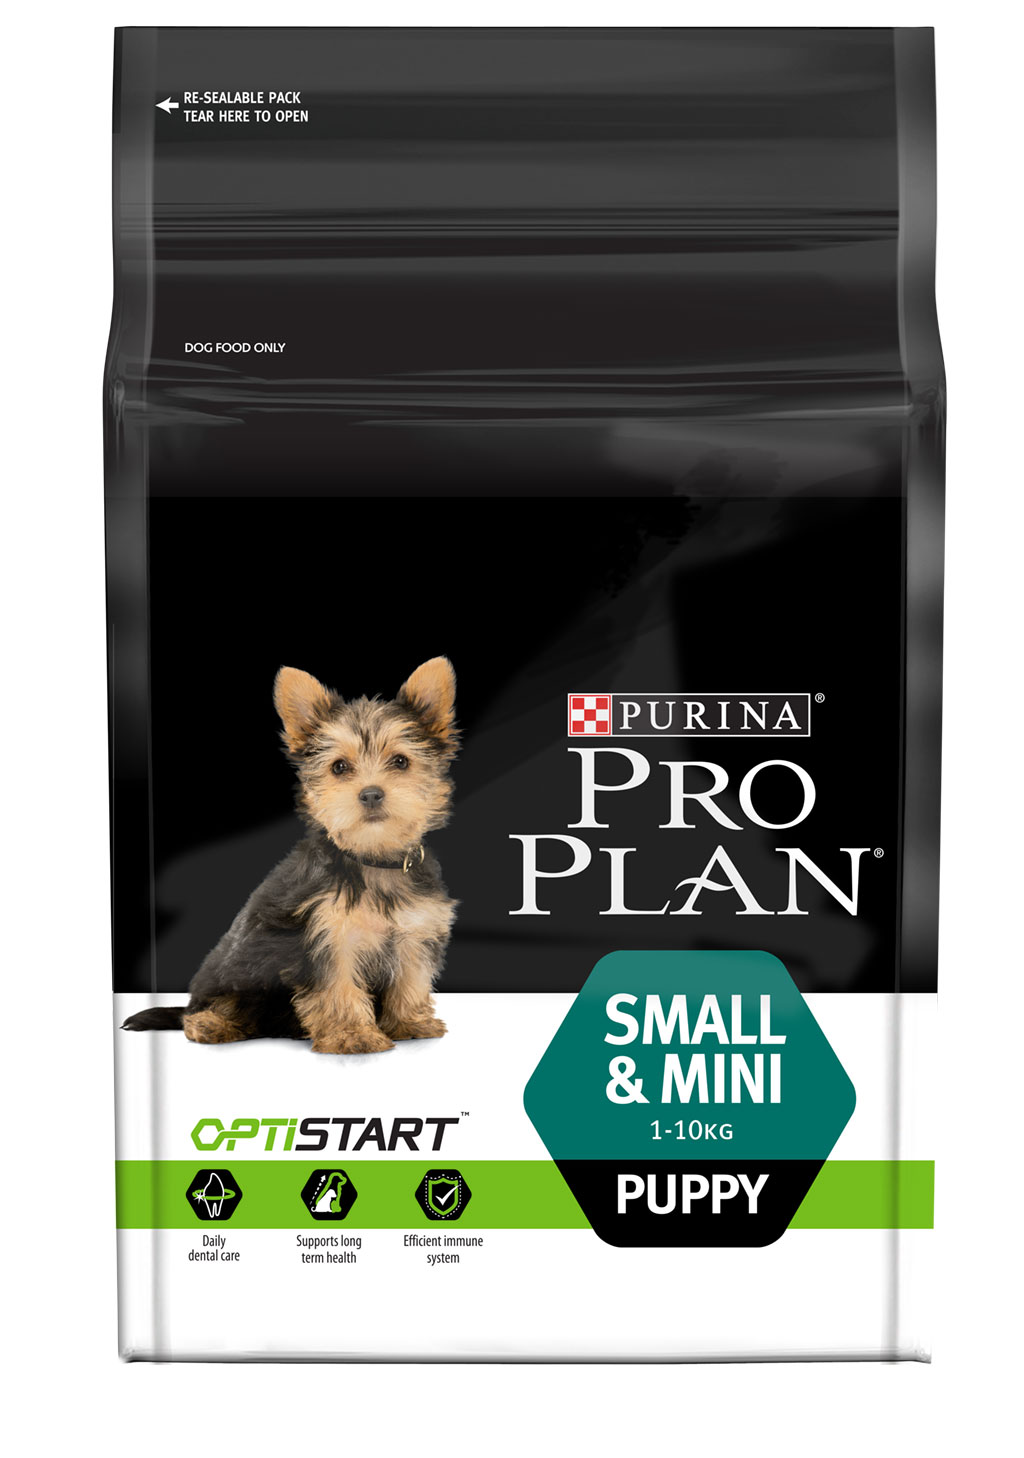 PRO PLAN Puppy Small and Mini with OPTISTART 2.5kg 